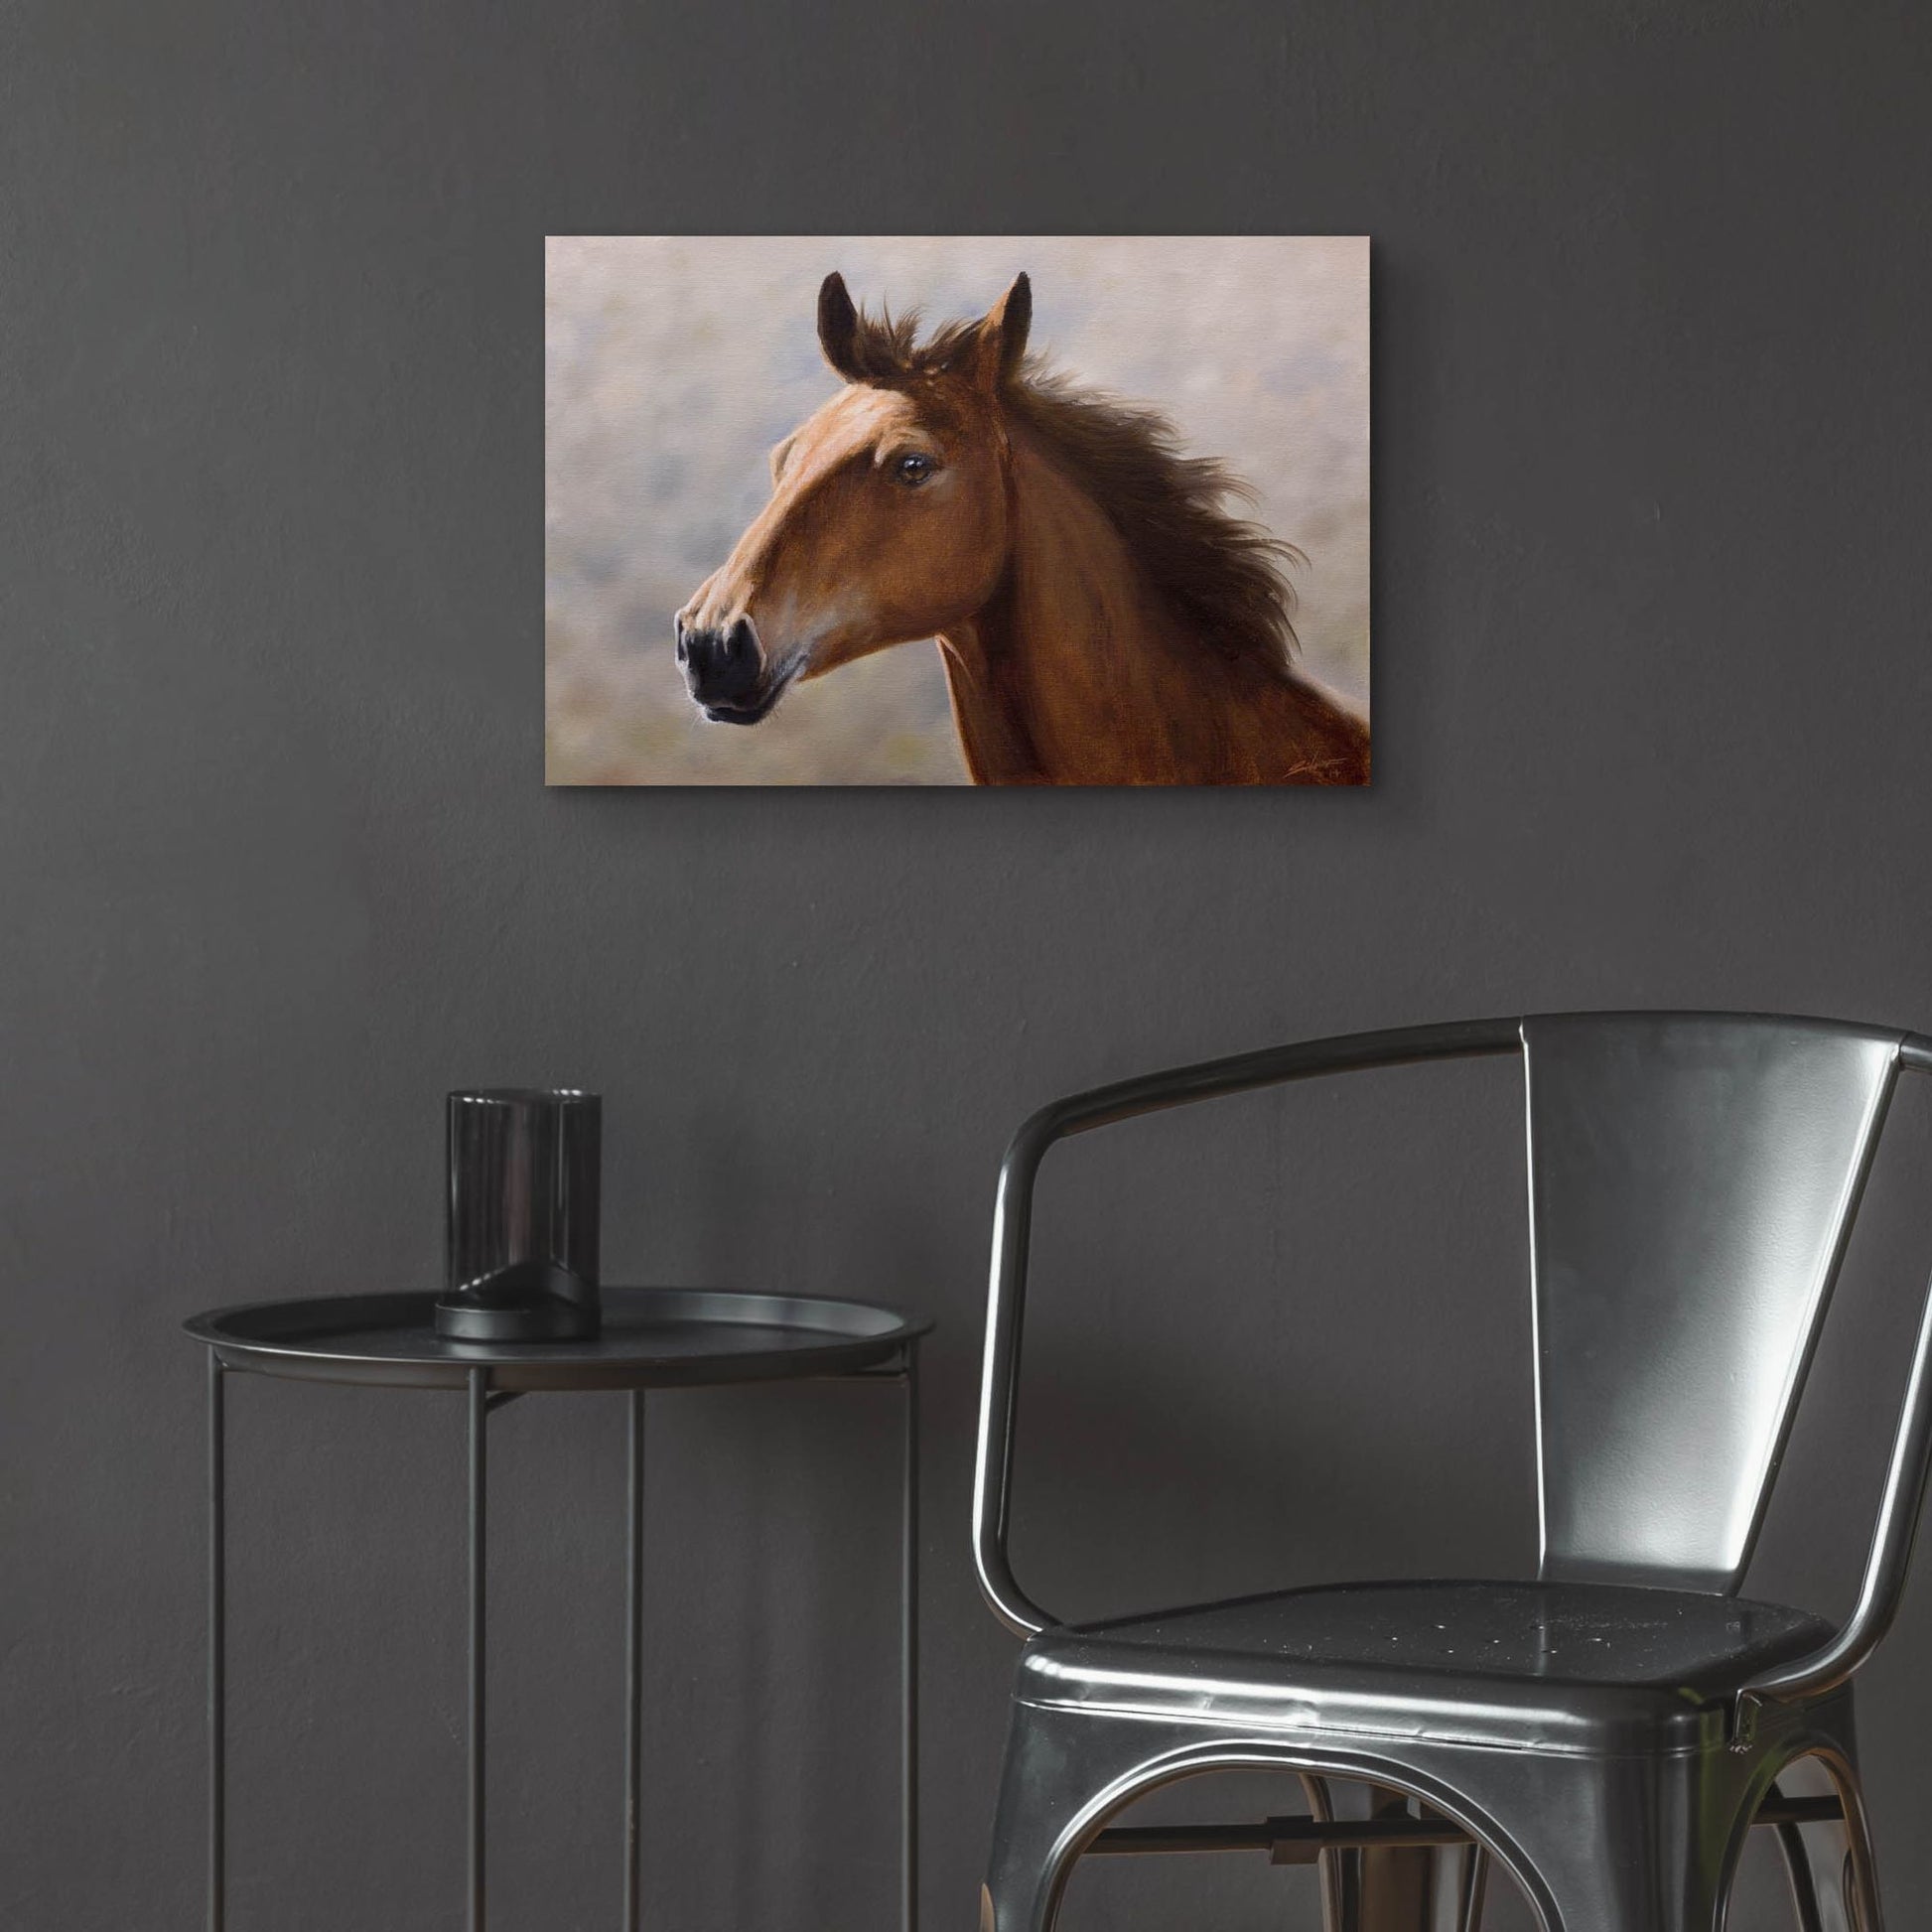 Epic Art 'Horse Thoughts' by John Silver, Acrylic Glass Wall Art,24x16